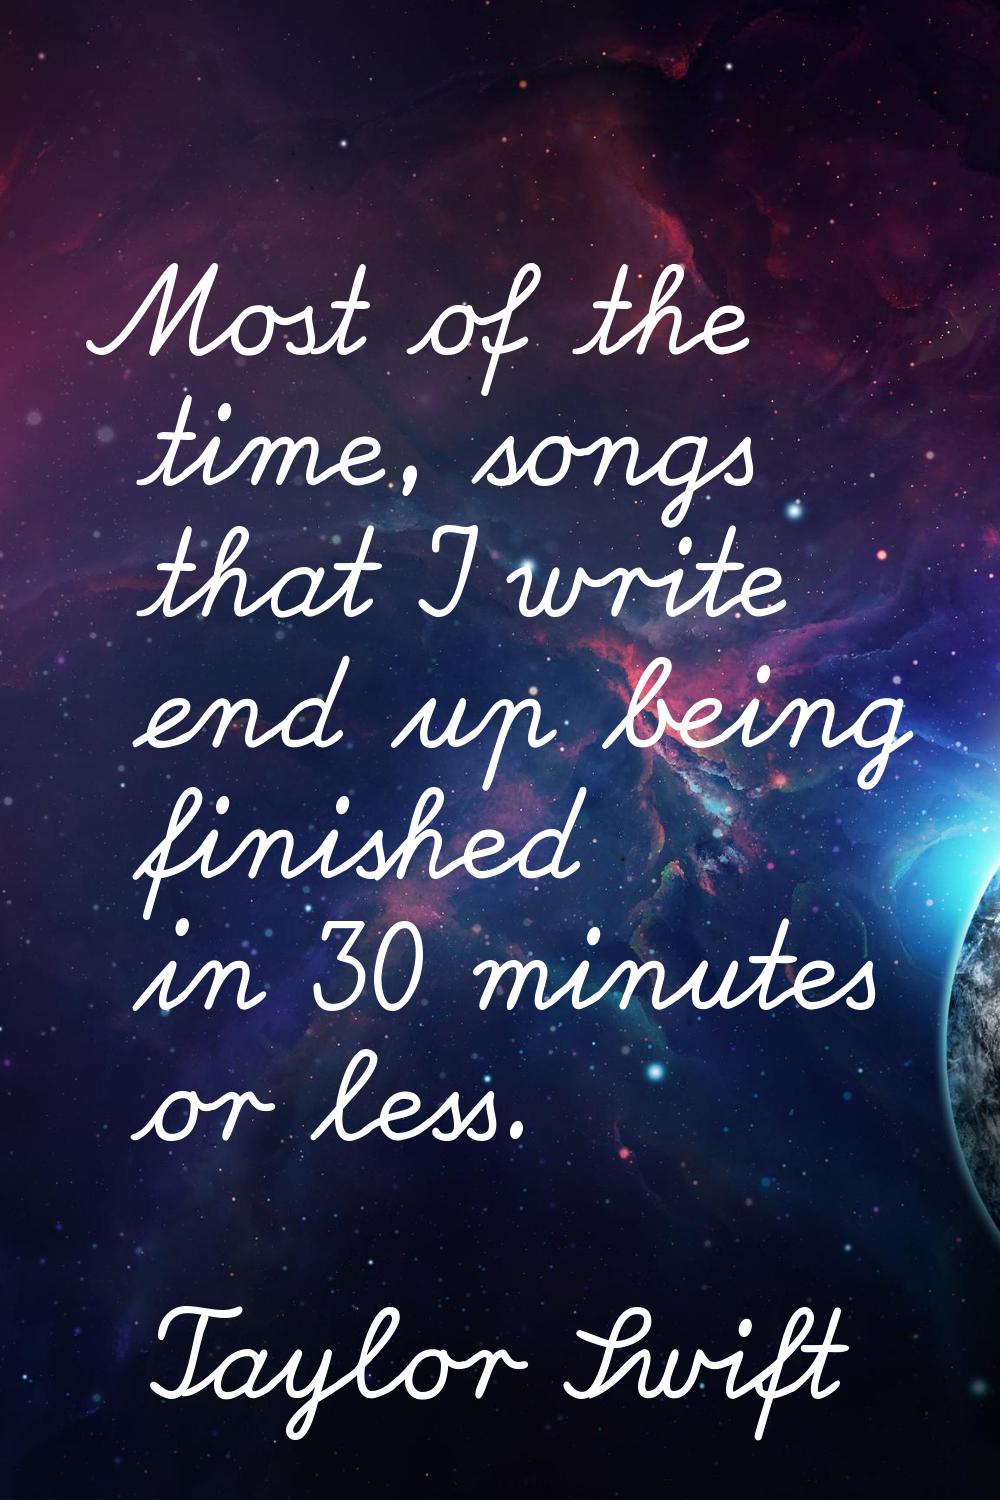 Most of the time, songs that I write end up being finished in 30 minutes or less.